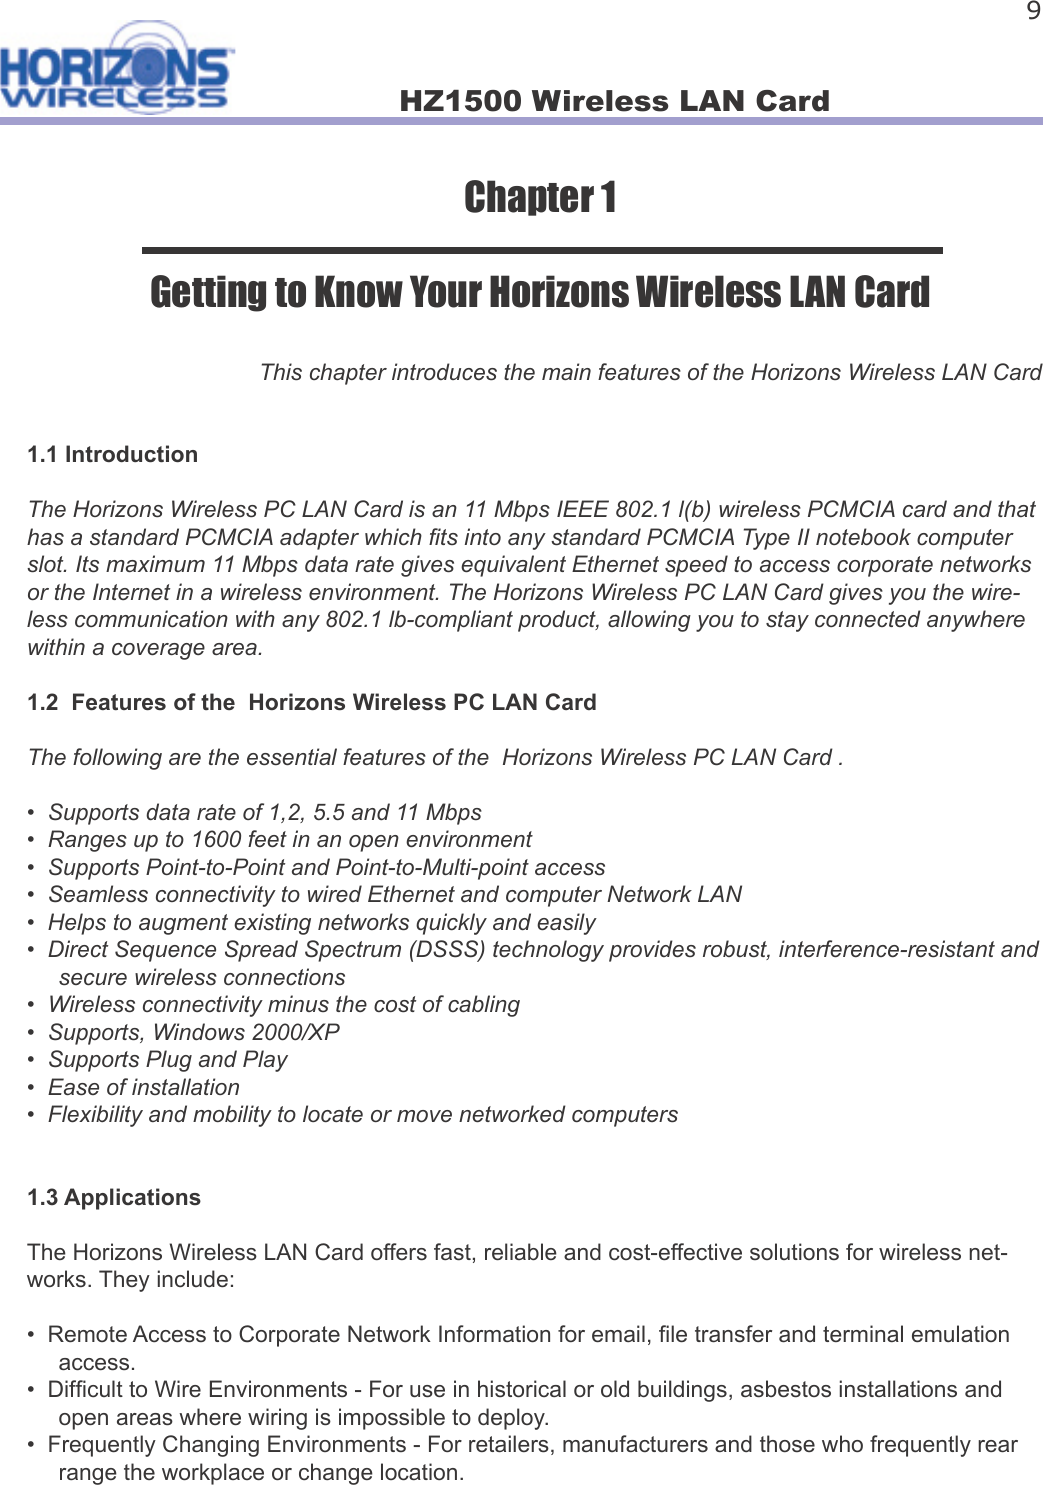 HZ1500 Wireless LAN Card 9Chapter 1Getting to Know Your Horizons Wireless LAN CardThis chapter introduces the main features of the Horizons Wireless LAN Card1.1 IntroductionThe Horizons Wireless PC LAN Card is an 11 Mbps IEEE 802.1 l(b) wireless PCMCIA card and that has a standard PCMCIA adapter which  ts into any standard PCMCIA Type II notebook computer slot. Its maximum 11 Mbps data rate gives equivalent Ethernet speed to access corporate networks or the Internet in a wireless environment. The Horizons Wireless PC LAN Card gives you the wire-less communication with any 802.1 lb-compliant product, allowing you to stay connected anywhere within a coverage area.1.2  Features of the  Horizons Wireless PC LAN Card The following are the essential features of the  Horizons Wireless PC LAN Card .•  Supports data rate of 1,2, 5.5 and 11 Mbps•  Ranges up to 1600 feet in an open environment•  Supports Point-to-Point and Point-to-Multi-point access•  Seamless connectivity to wired Ethernet and computer Network LAN•  Helps to augment existing networks quickly and easily•  Direct Sequence Spread Spectrum (DSSS) technology provides robust, interference-resistant and     secure wireless connections•  Wireless connectivity minus the cost of cabling•  Supports, Windows 2000/XP•  Supports Plug and Play•  Ease of installation•  Flexibility and mobility to locate or move networked computers1.3 ApplicationsThe Horizons Wireless LAN Card offers fast, reliable and cost-effective solutions for wireless net-works. They include:•  Remote Access to Corporate Network Information for email,  le transfer and terminal emulation        access.•  Dif cult to Wire Environments - For use in historical or old buildings, asbestos installations and      open areas where wiring is impossible to deploy.•  Frequently Changing Environments - For retailers, manufacturers and those who frequently rear     range the workplace or change location.